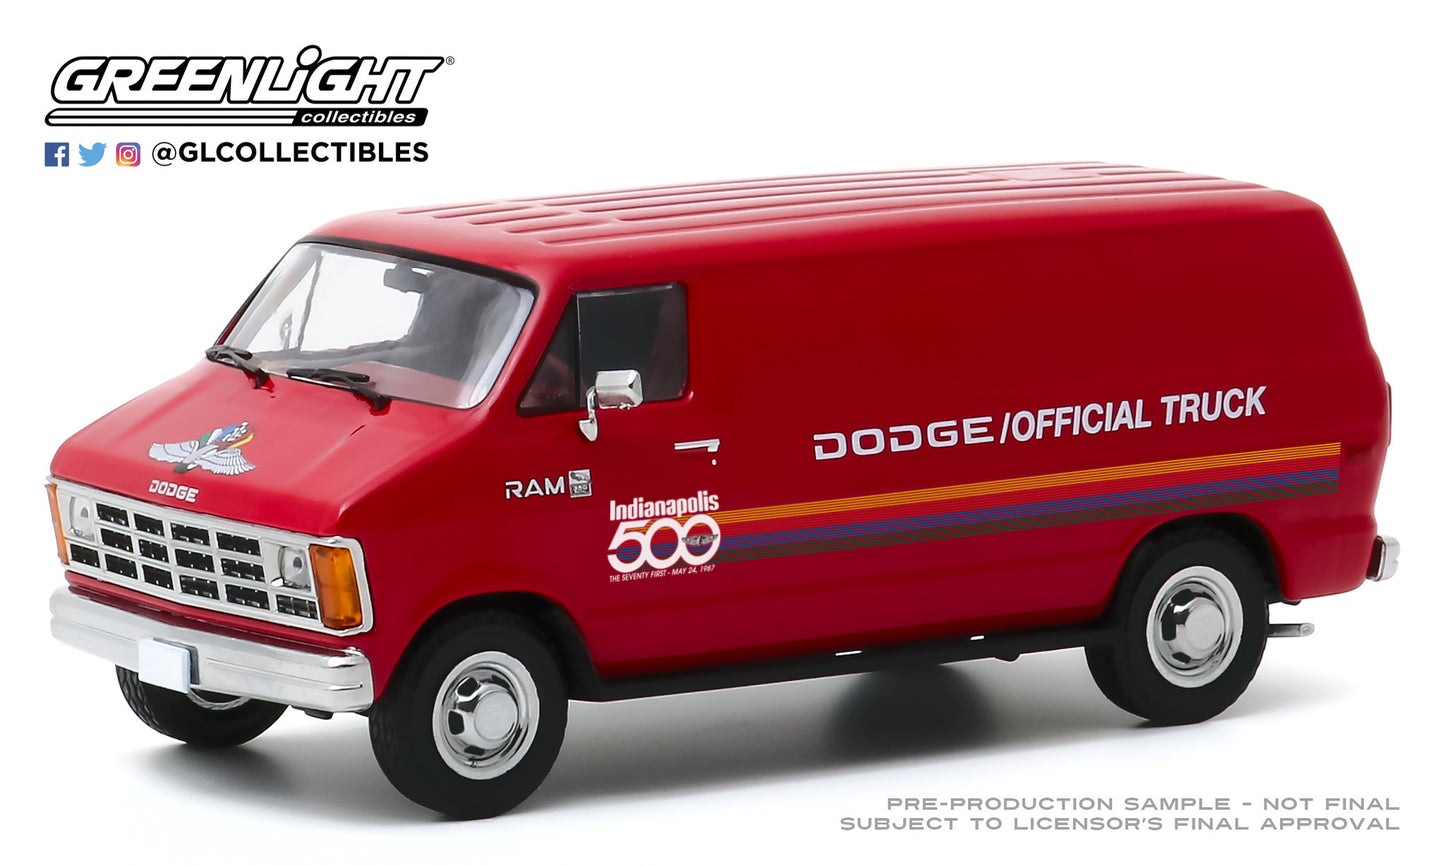 GreenLight 1:43 1987 Dodge Ram B150 Van 71st Annual Indianapolis 500 Mile Race Official Truck 86576